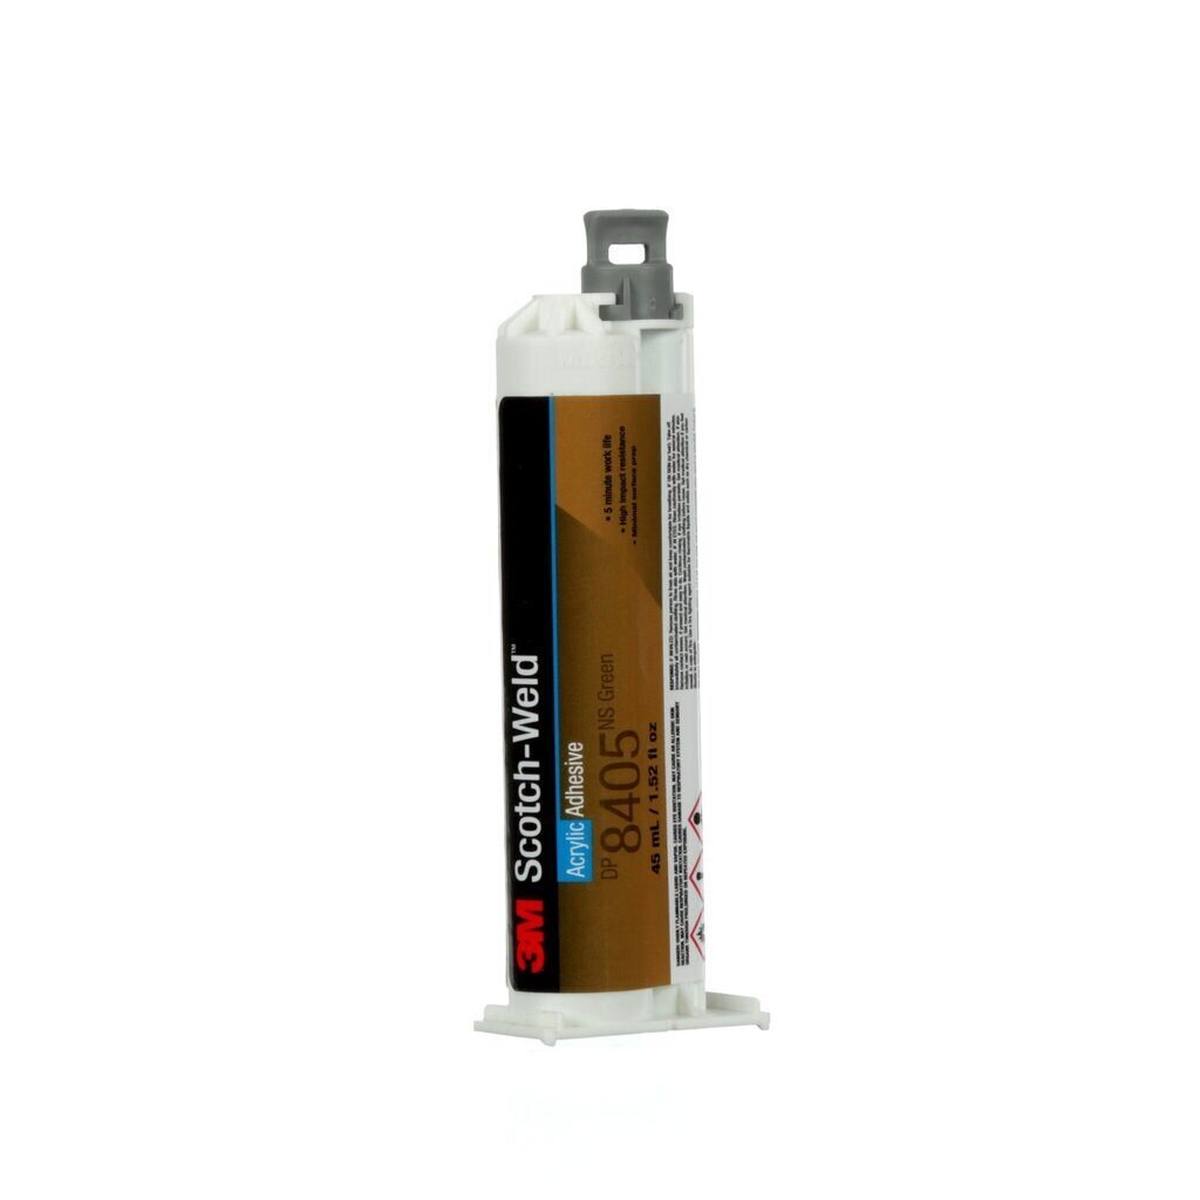 3M Scotch-Weld 2-component acrylate-based construction adhesive for the EPX system DP 8405 NS, green, 45 ml